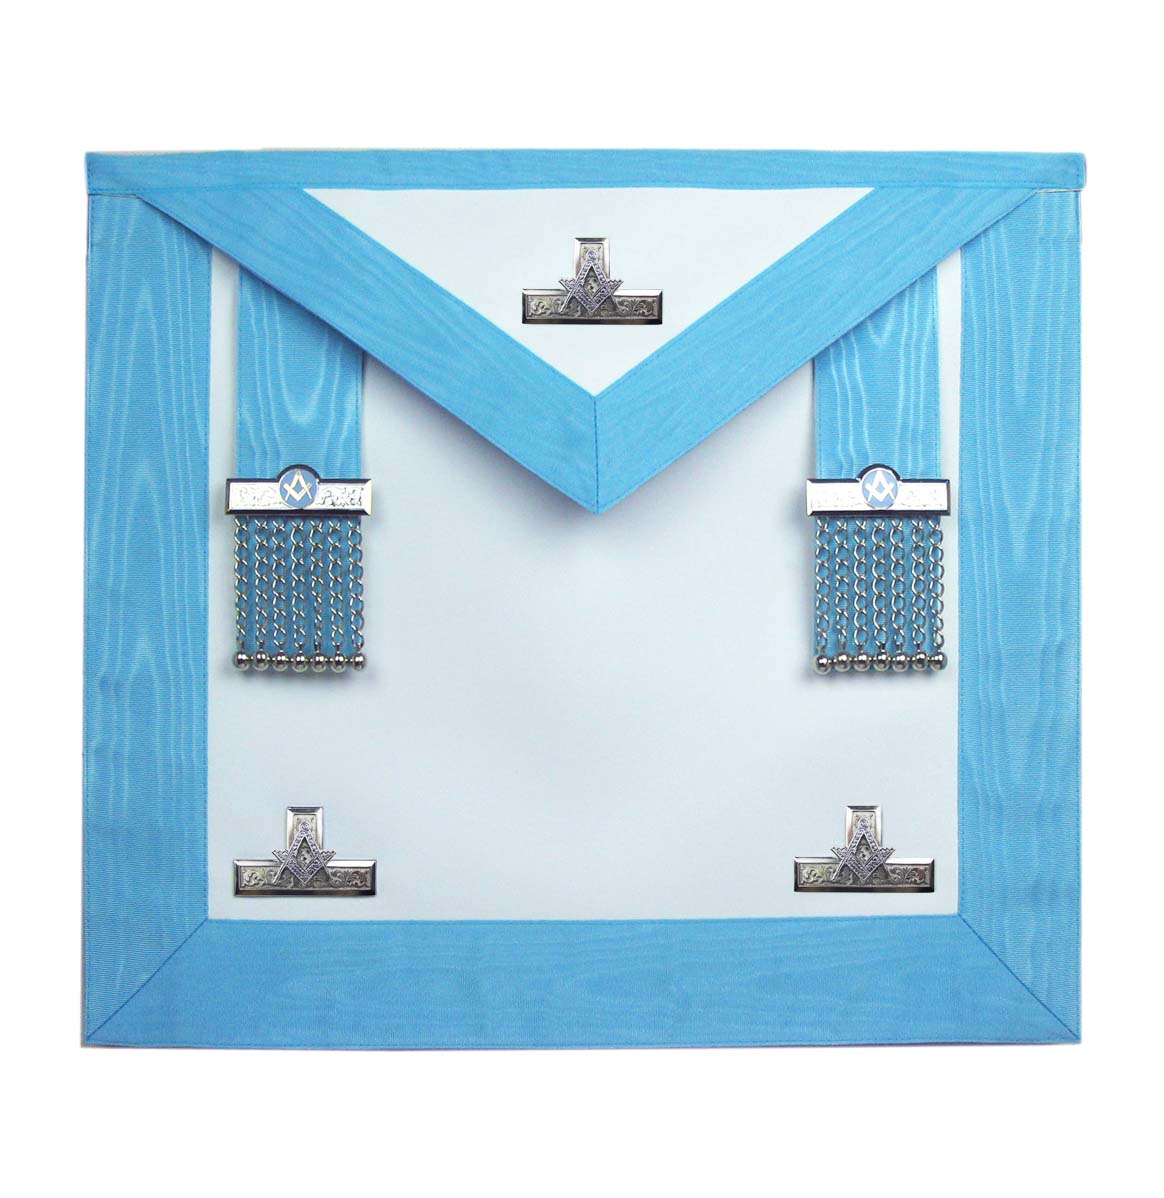 Premier Deluxe Worshipful Master Apron